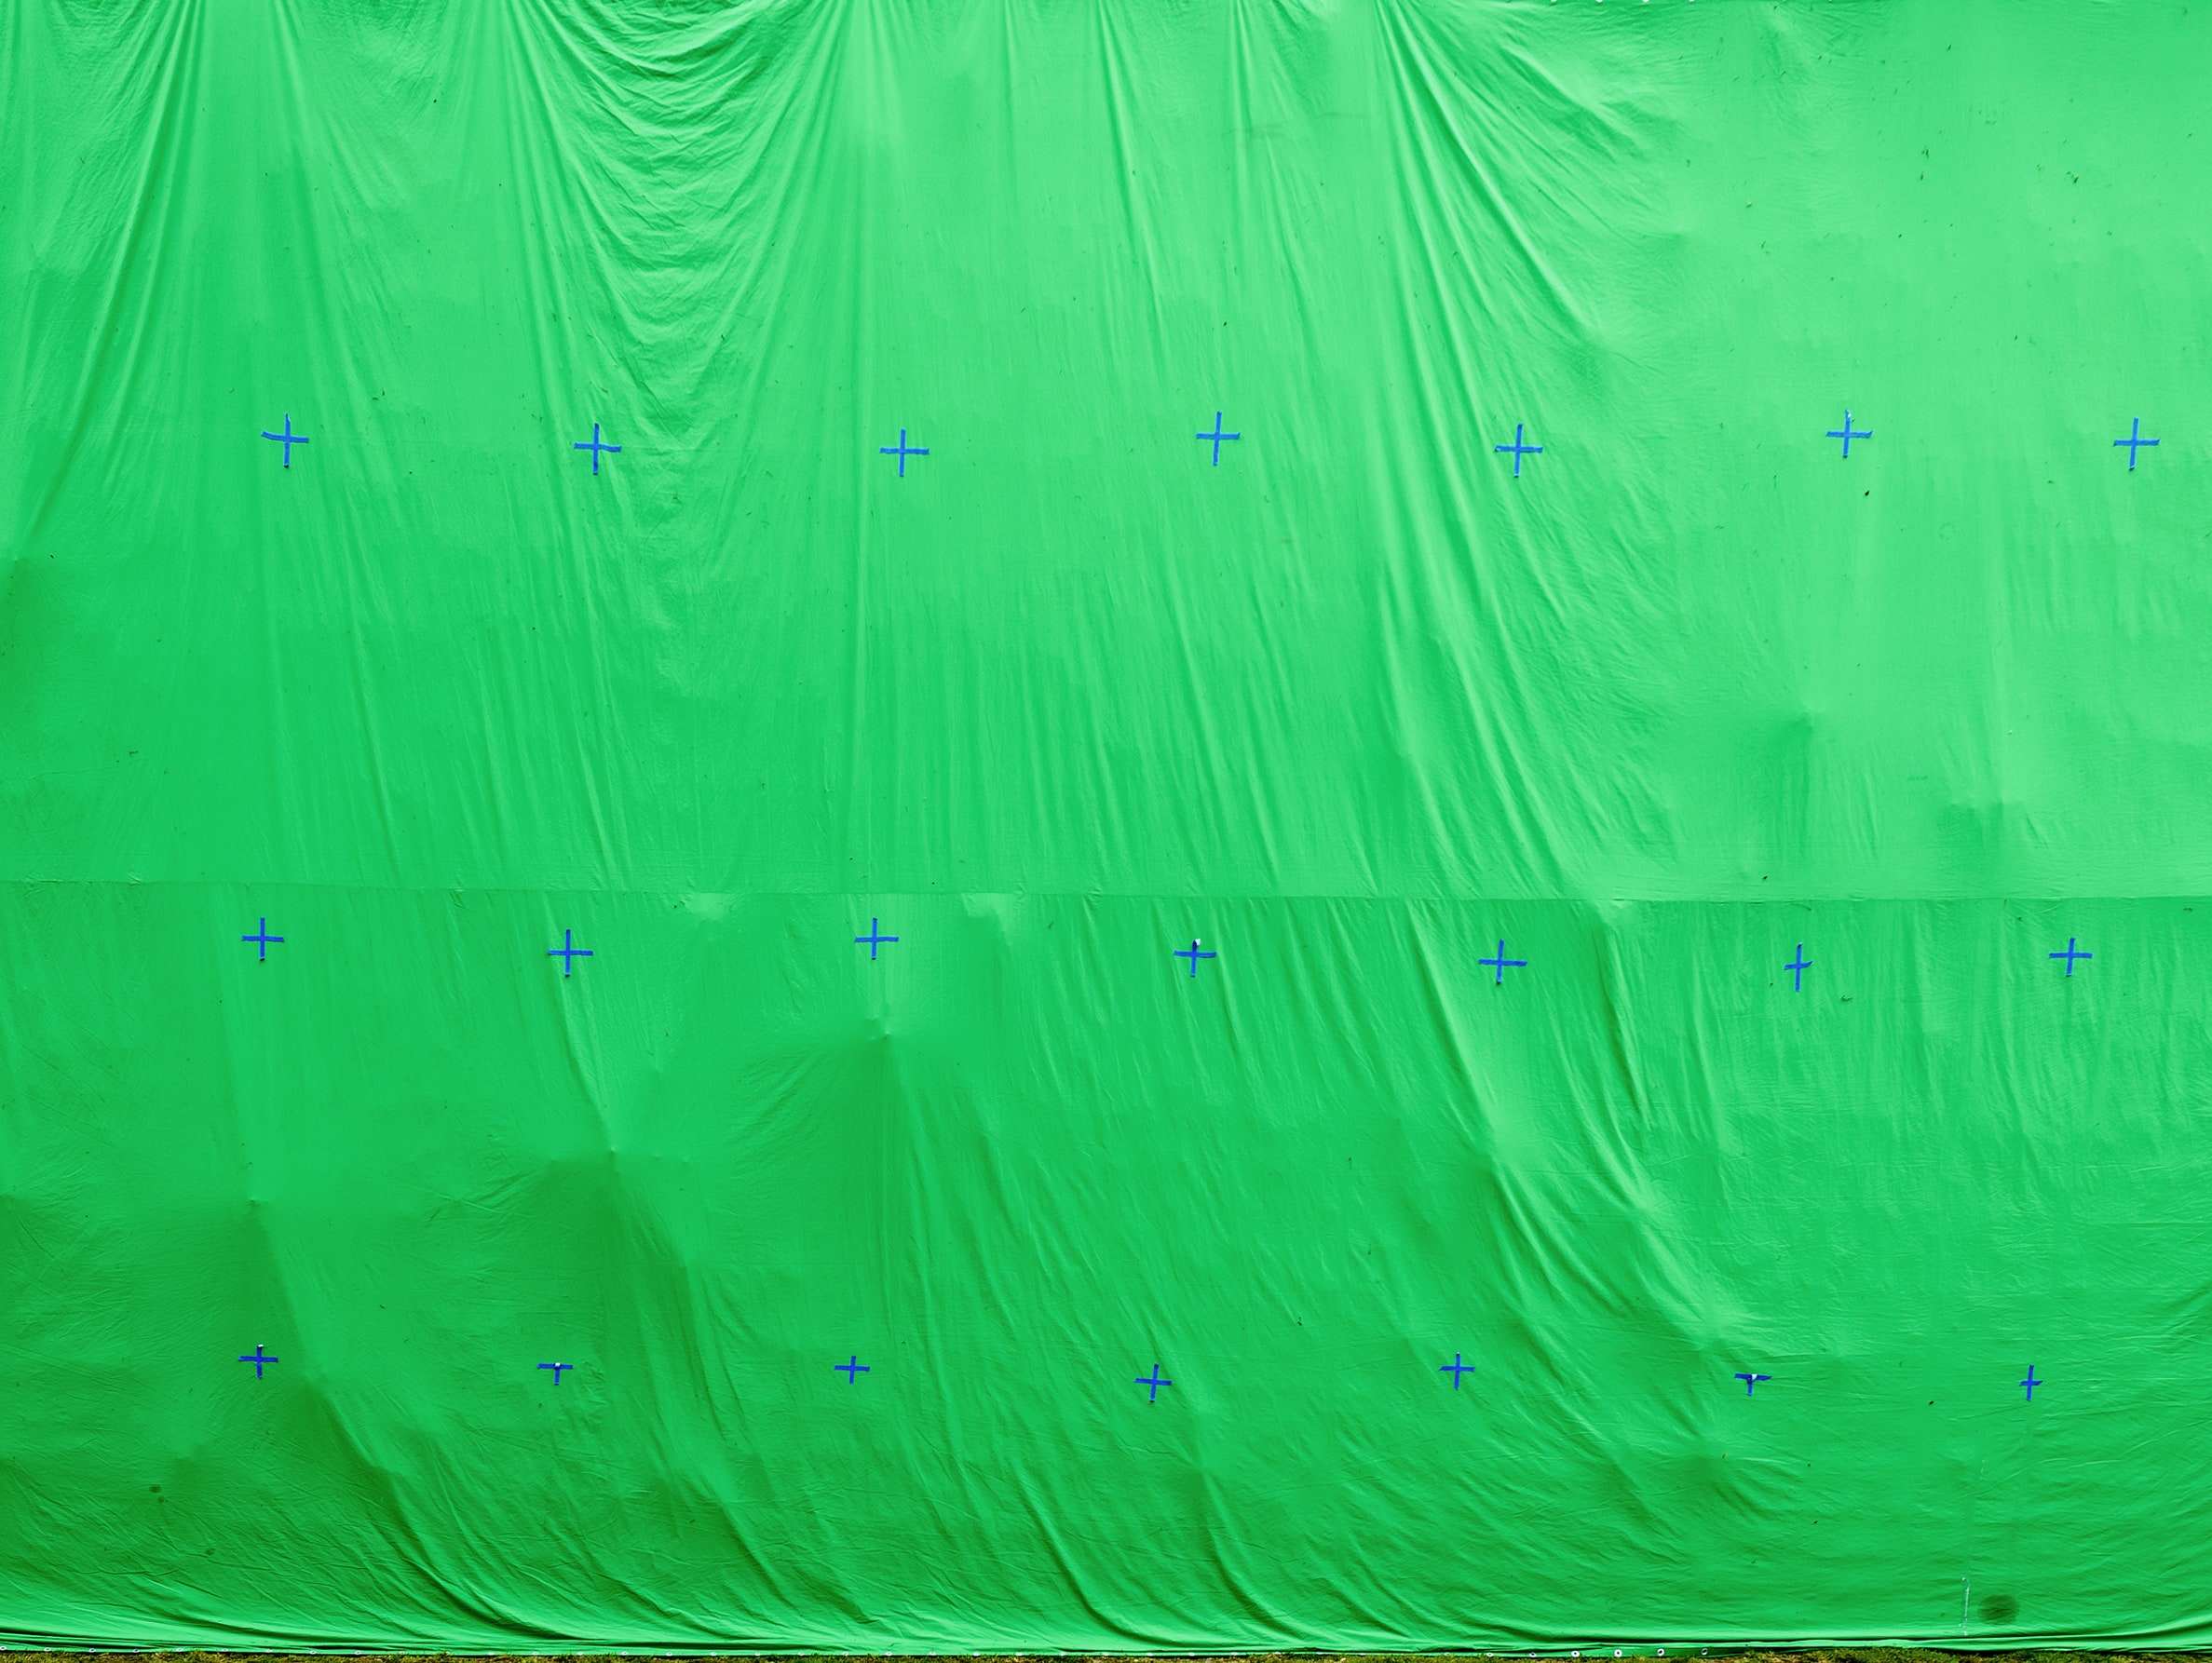 Green Screens In Youtube Videos